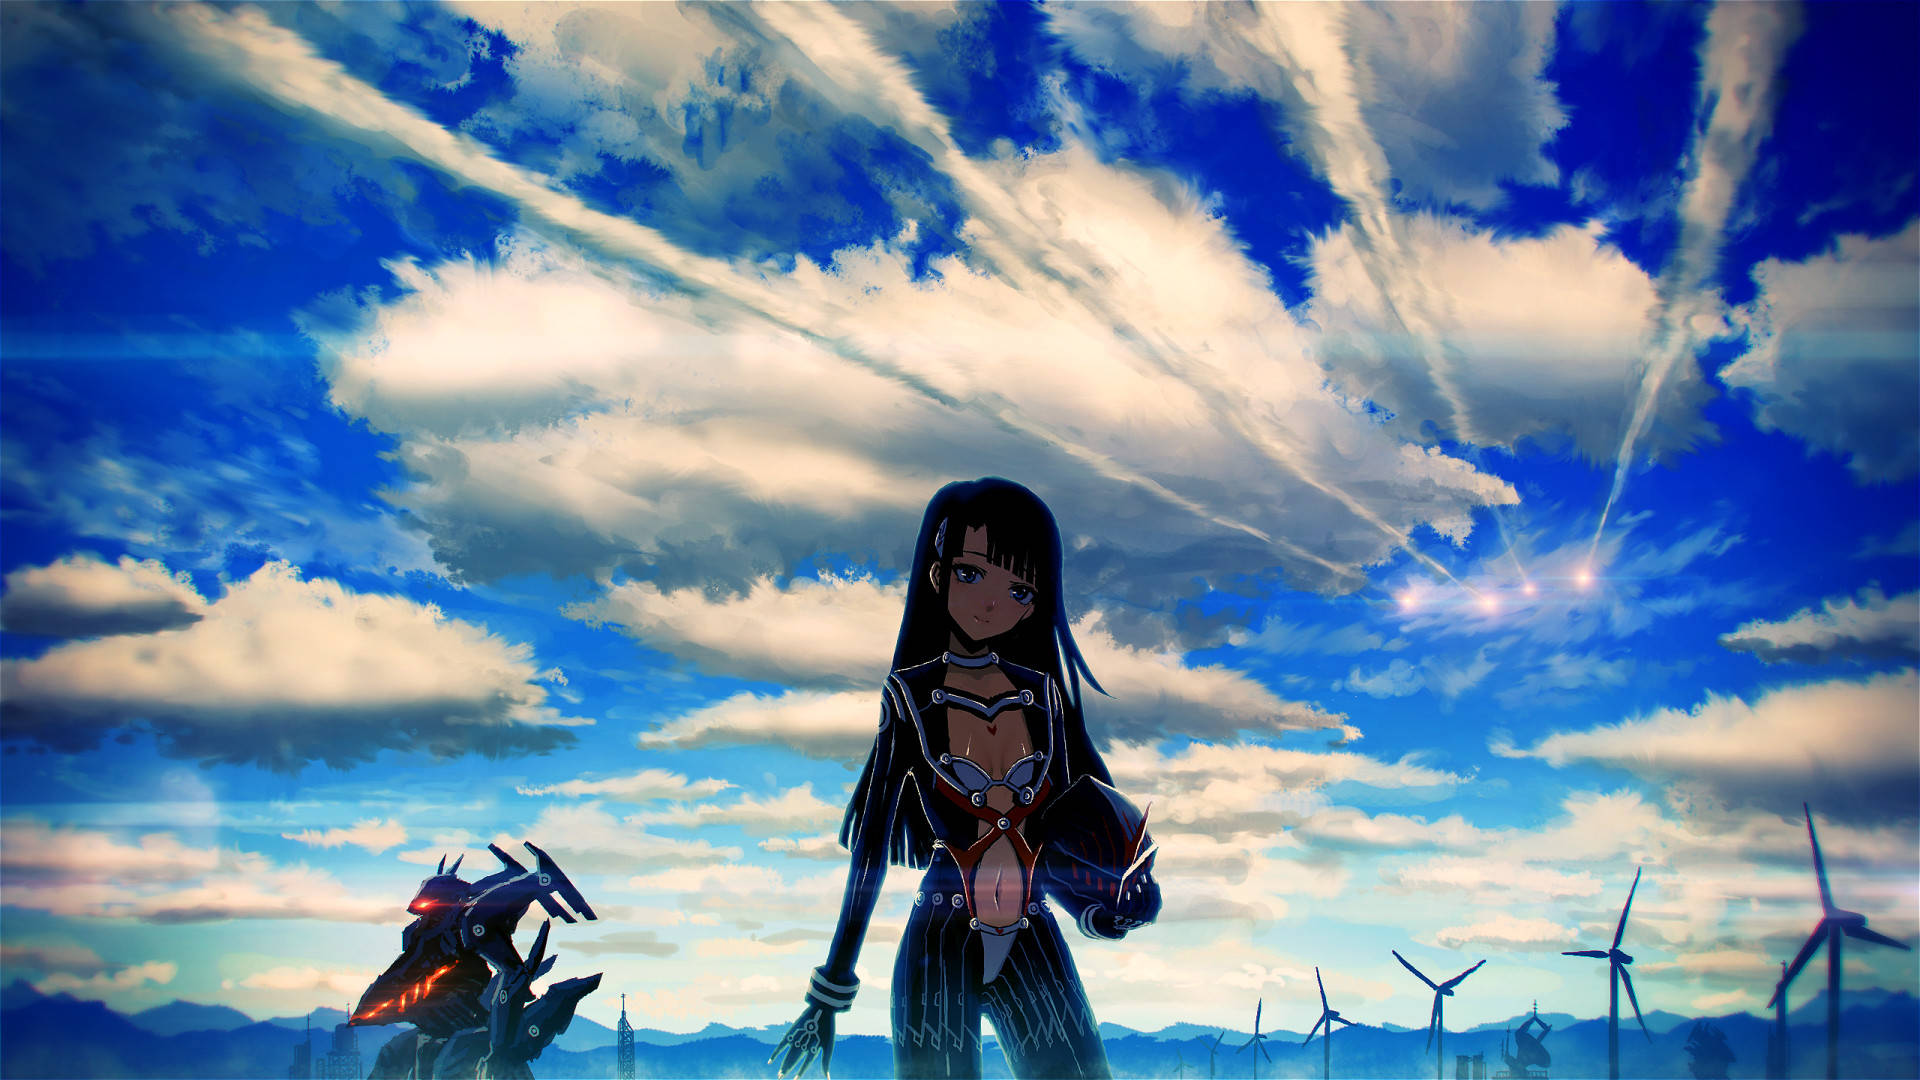 Amazing Anime Cloud With Girl Wallpaper